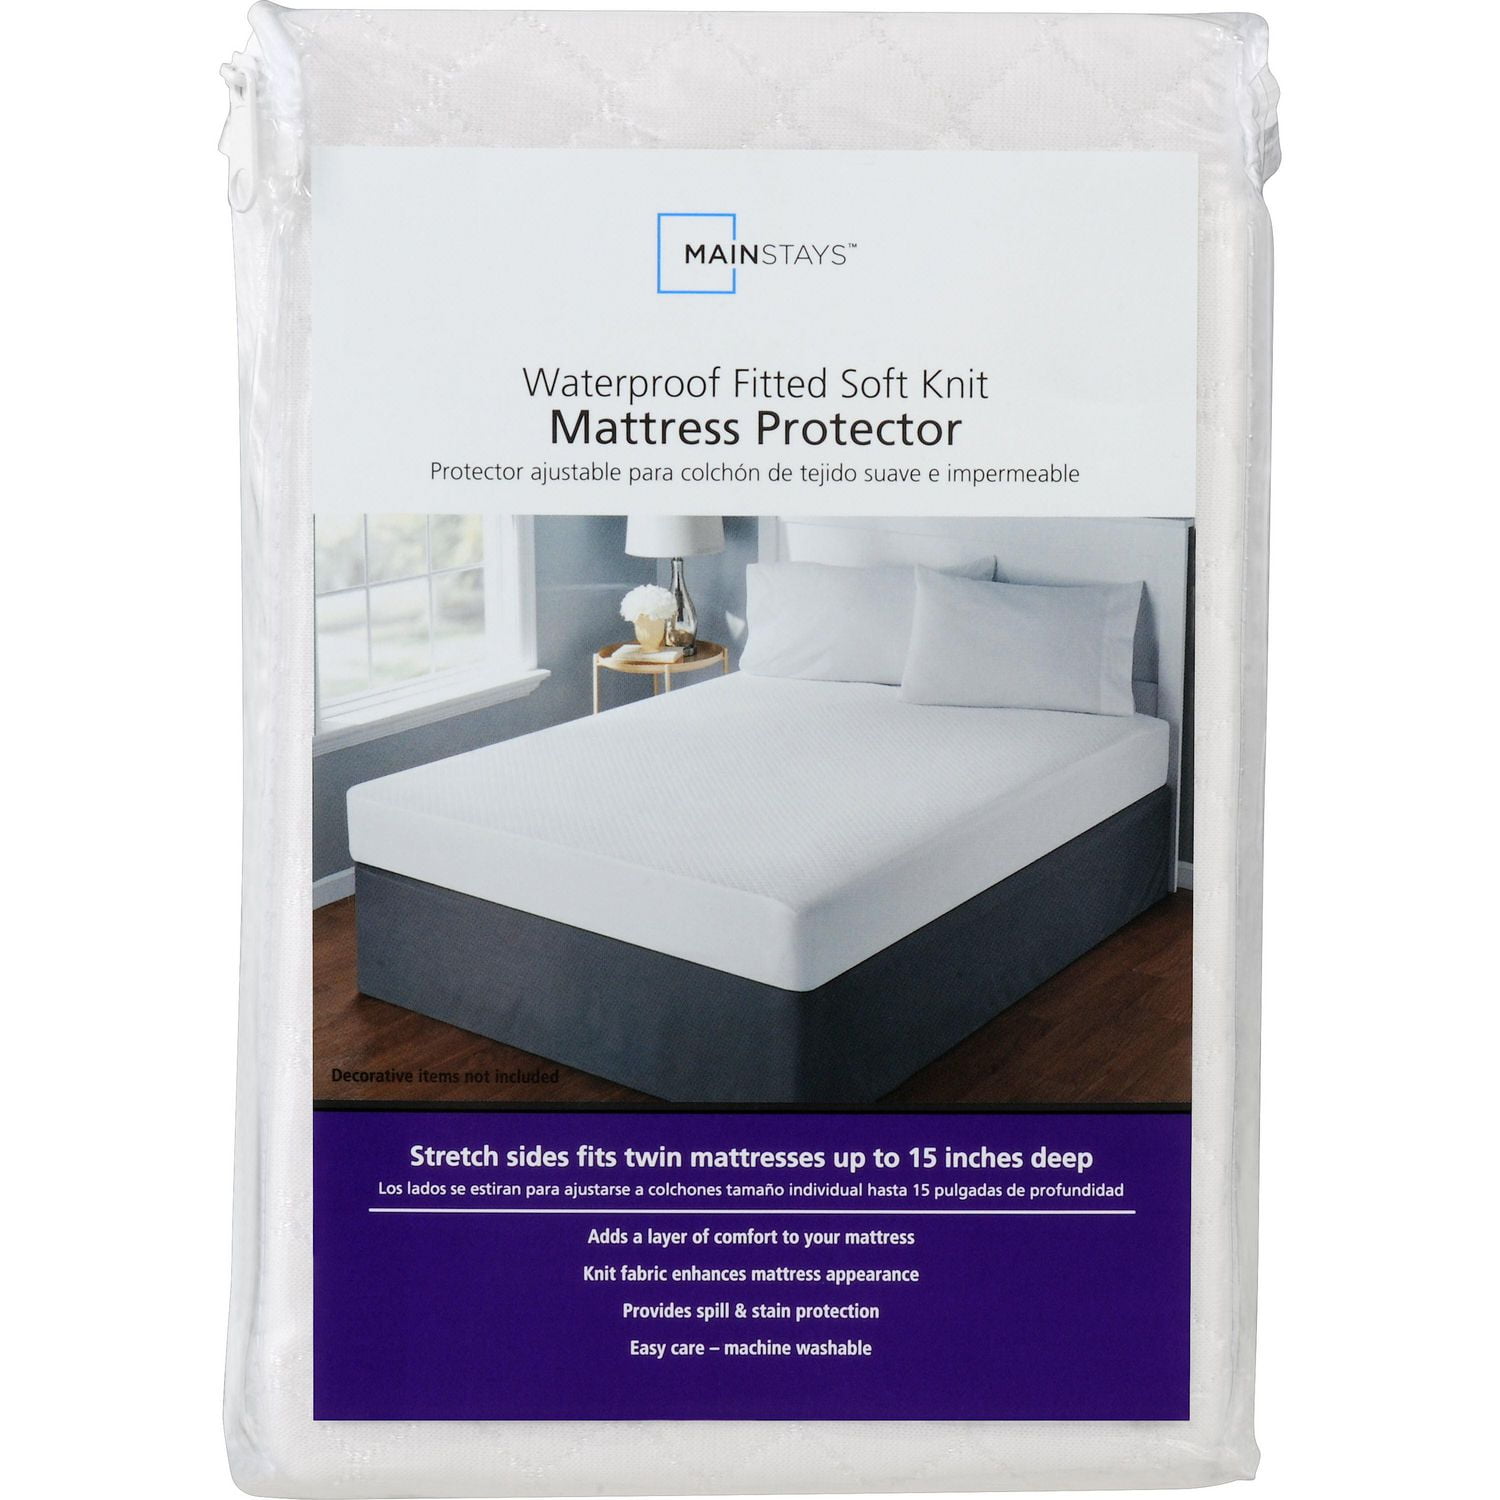 Mainstays Waterproof Fitted Soft Knit Mattress Protector